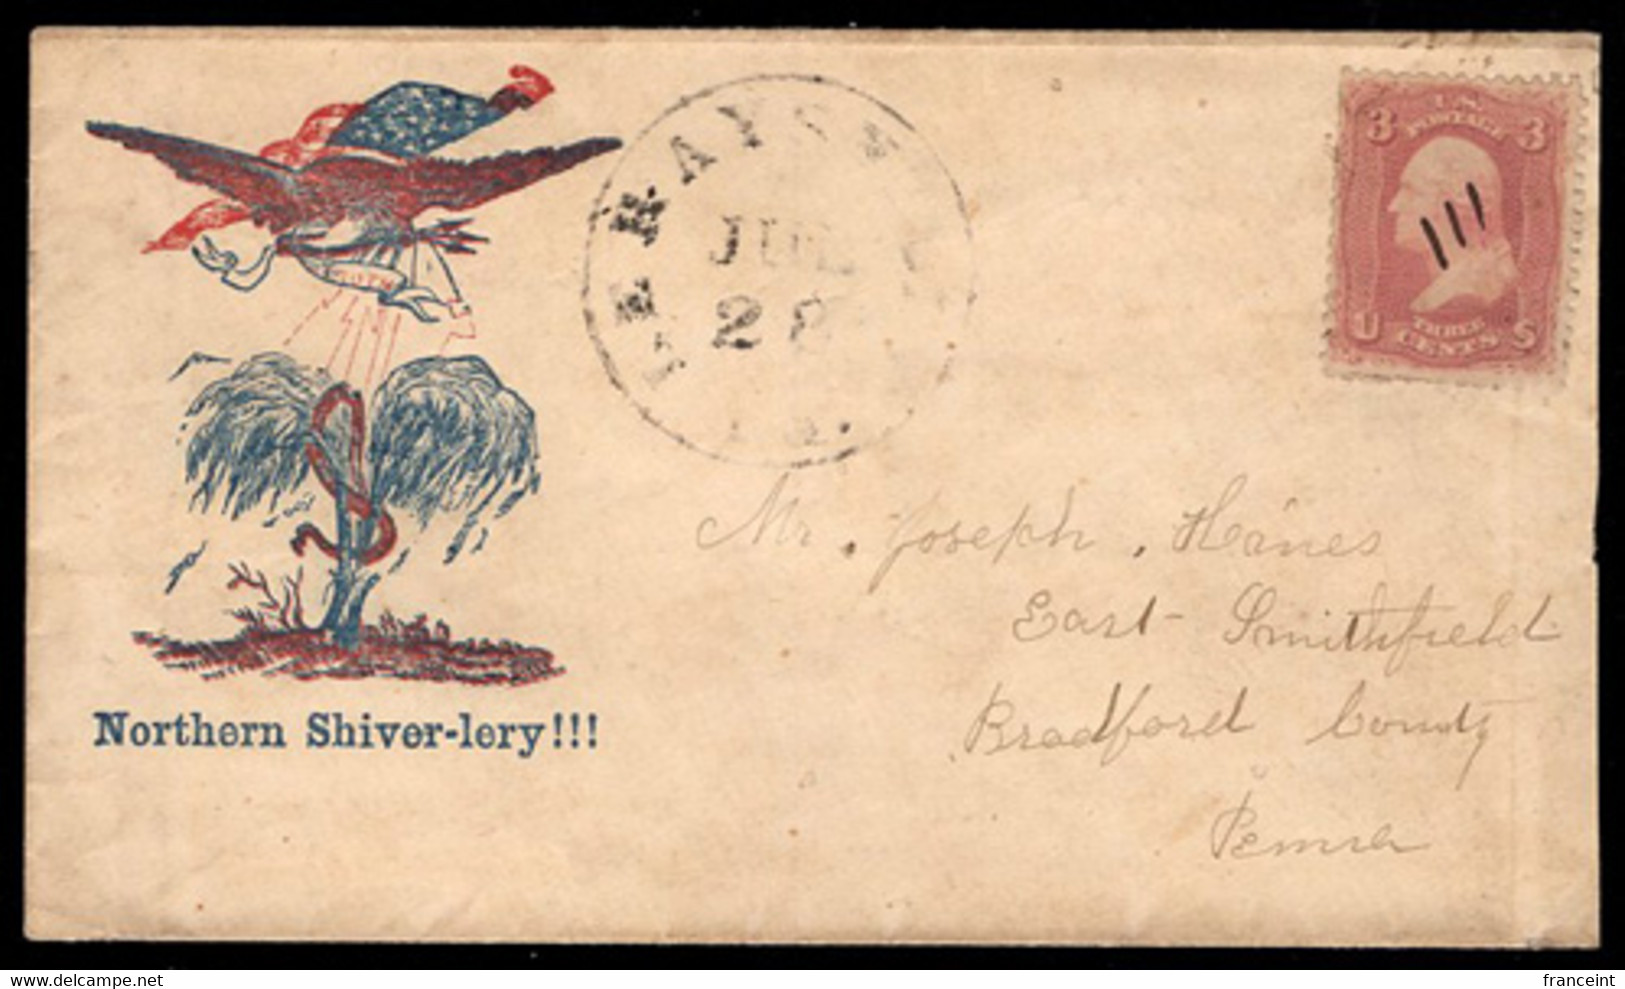 U.S.A.(1861) Eagle Carrying Banner Of Truth Over Serpent In Tree. U.S. Civil War Patriotic Cover With Bicolor Illusttrat - Postal History